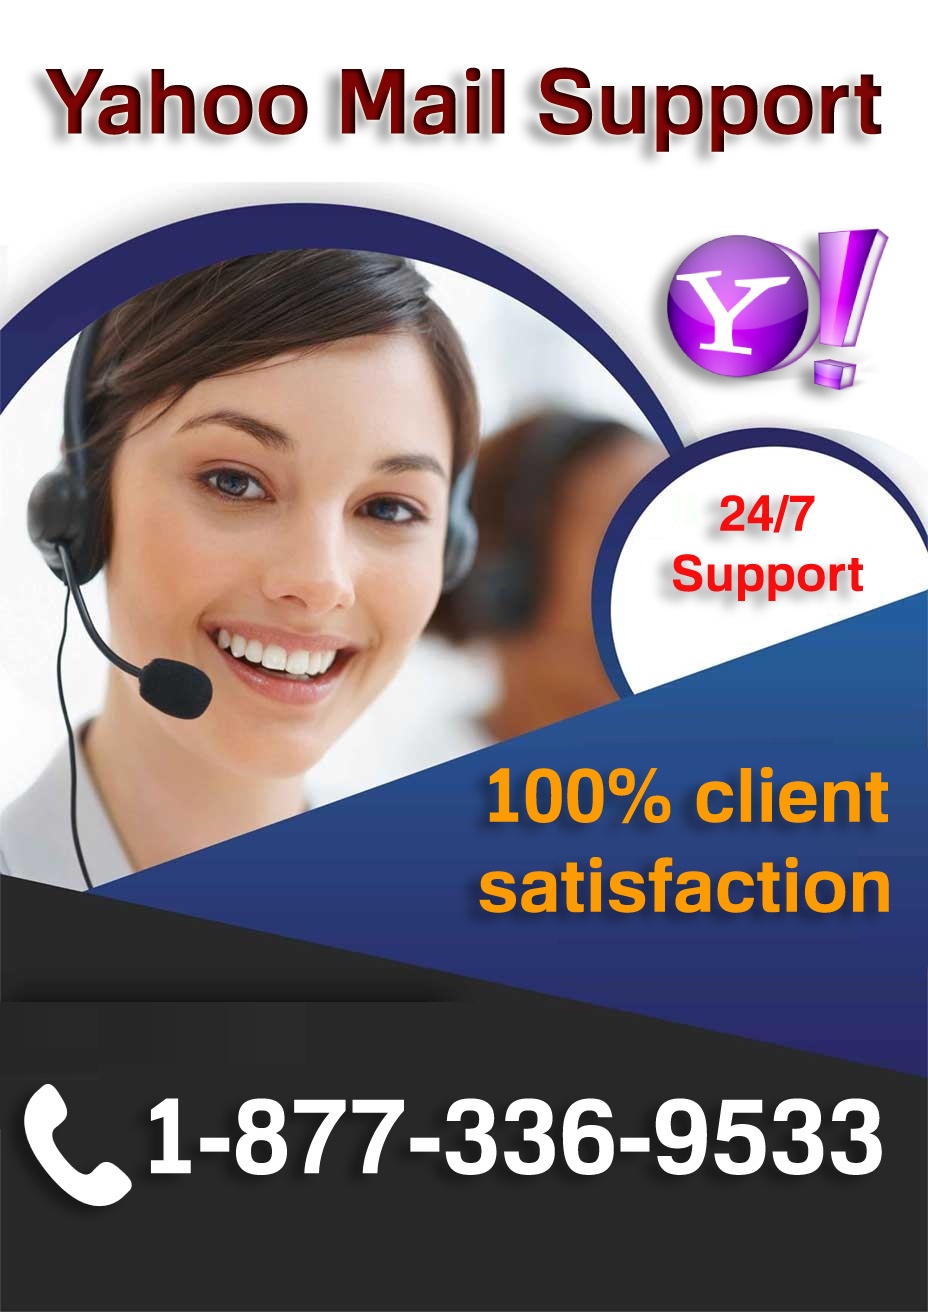 Yahoo Mail Support Number 1-877-336-9533 USA